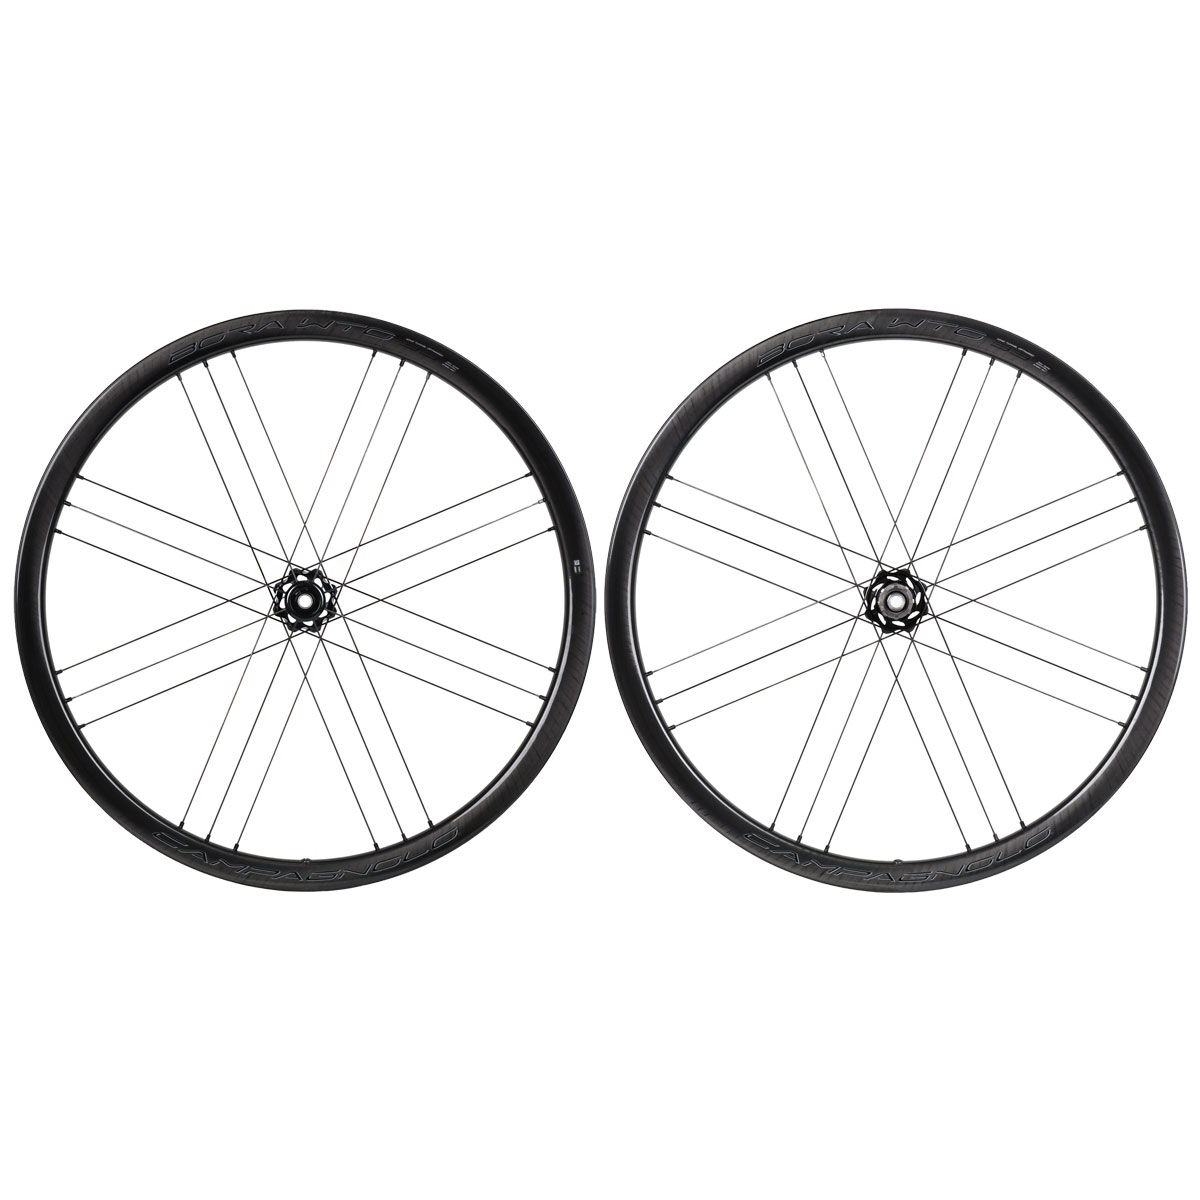 Picture of Campagnolo Bora WTO 33 DB - 28 Inch Wheelset - Carbon - AFS - Tubeless/Clincher - 2-Way Fit - 12x100mm | 12x142mm - SRAM XDR - Dark